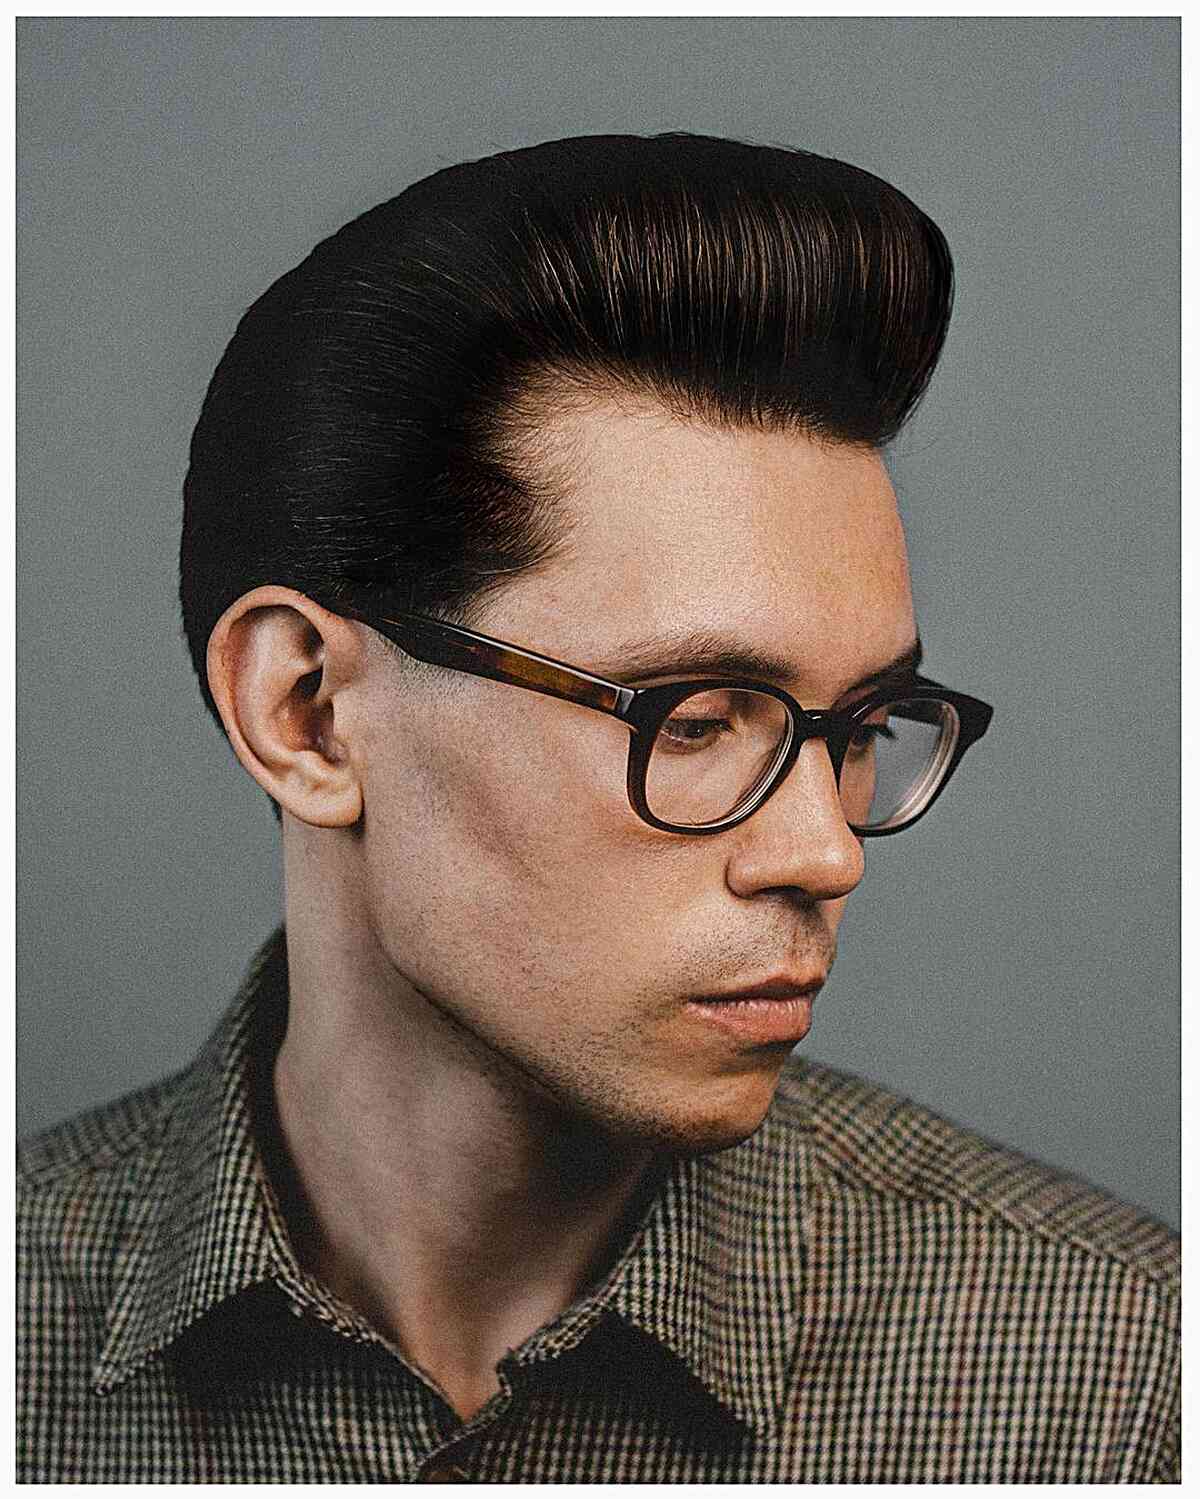 The Perfect Pompadour for Men with thick hair and glasses